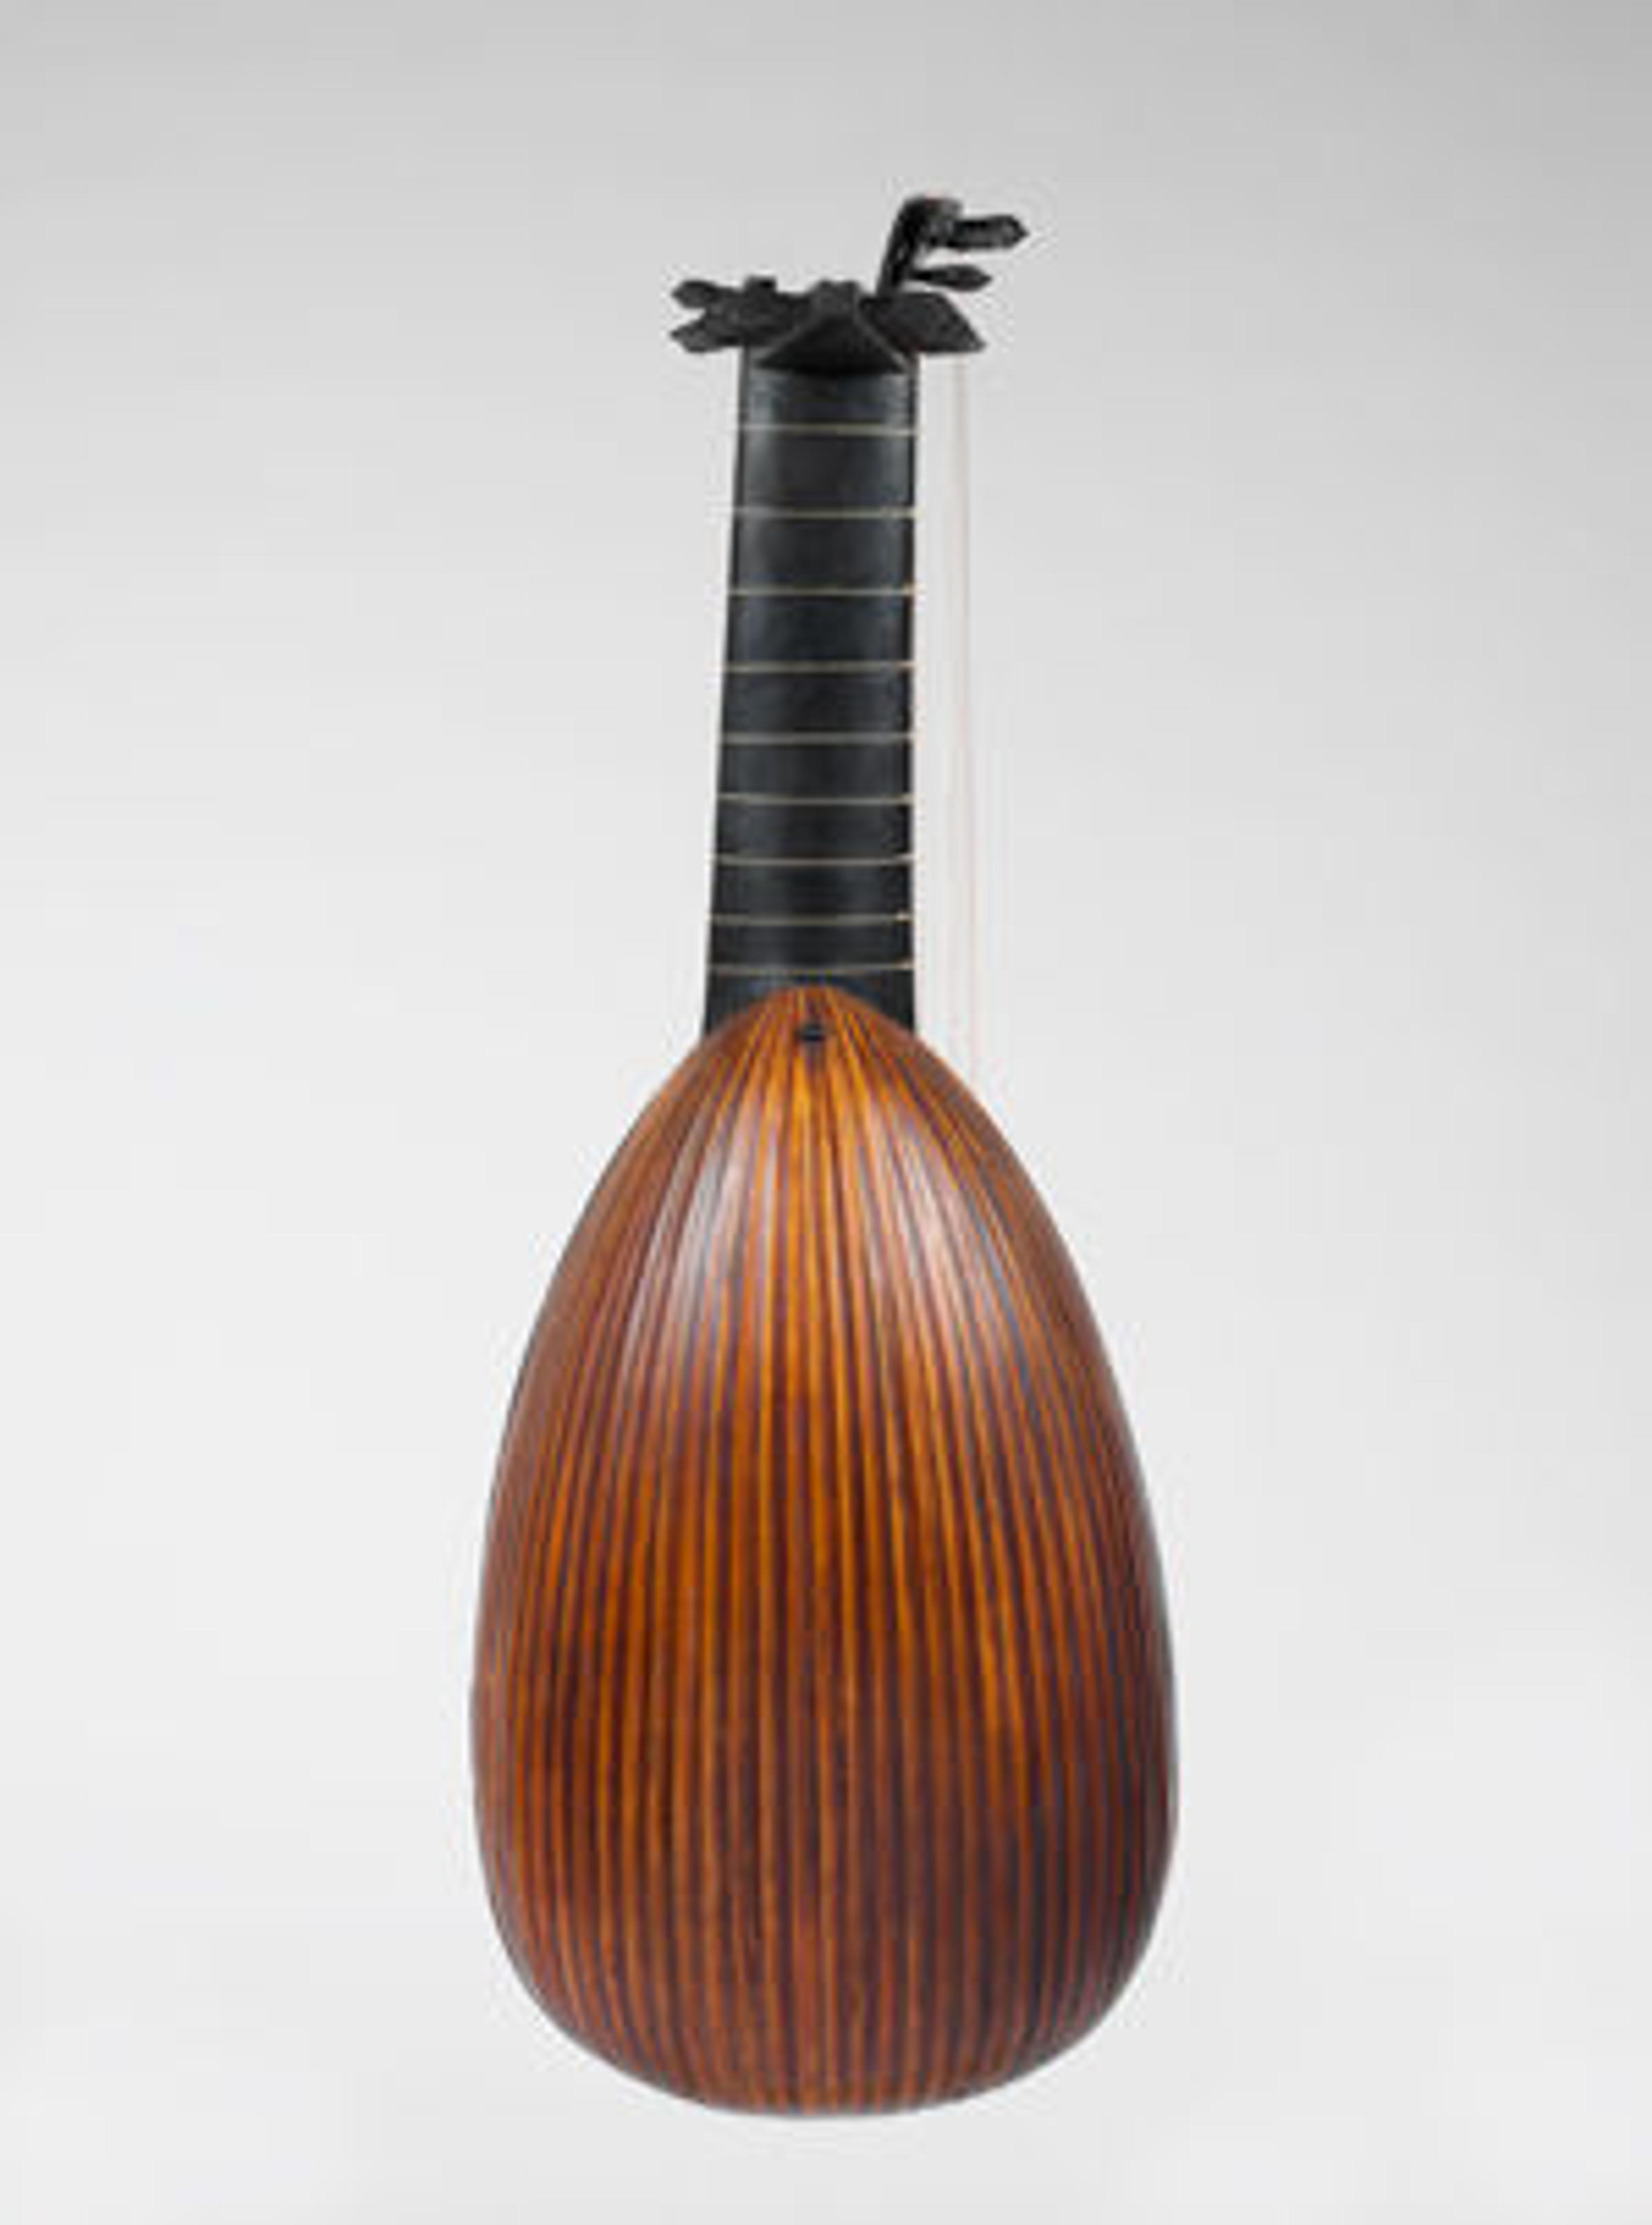 Attributed to Wendelin Tieffenbrucker (German, active 1570–1610) | Lute, late 16th century | 1989.13